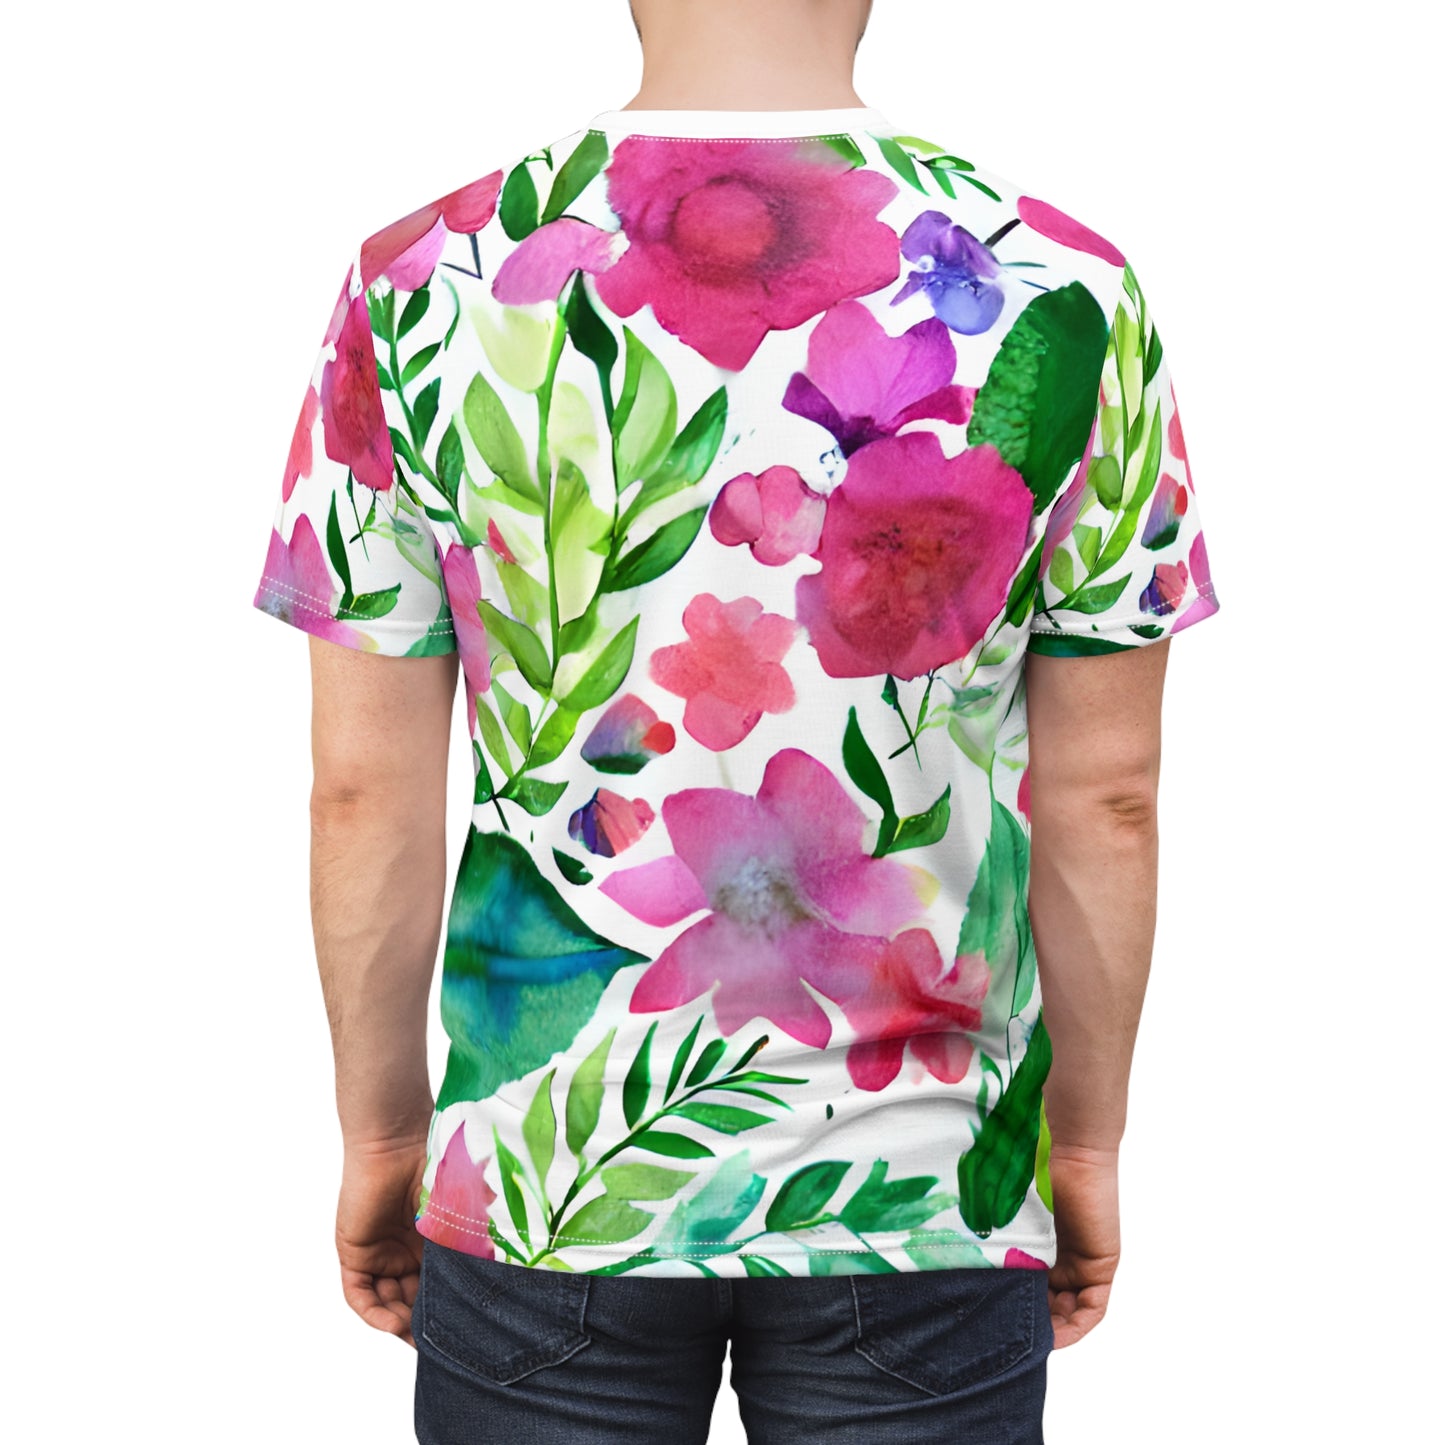 Floral Style, Graffiti Style, Abstract Style, Unisex Cut & Sew Tee